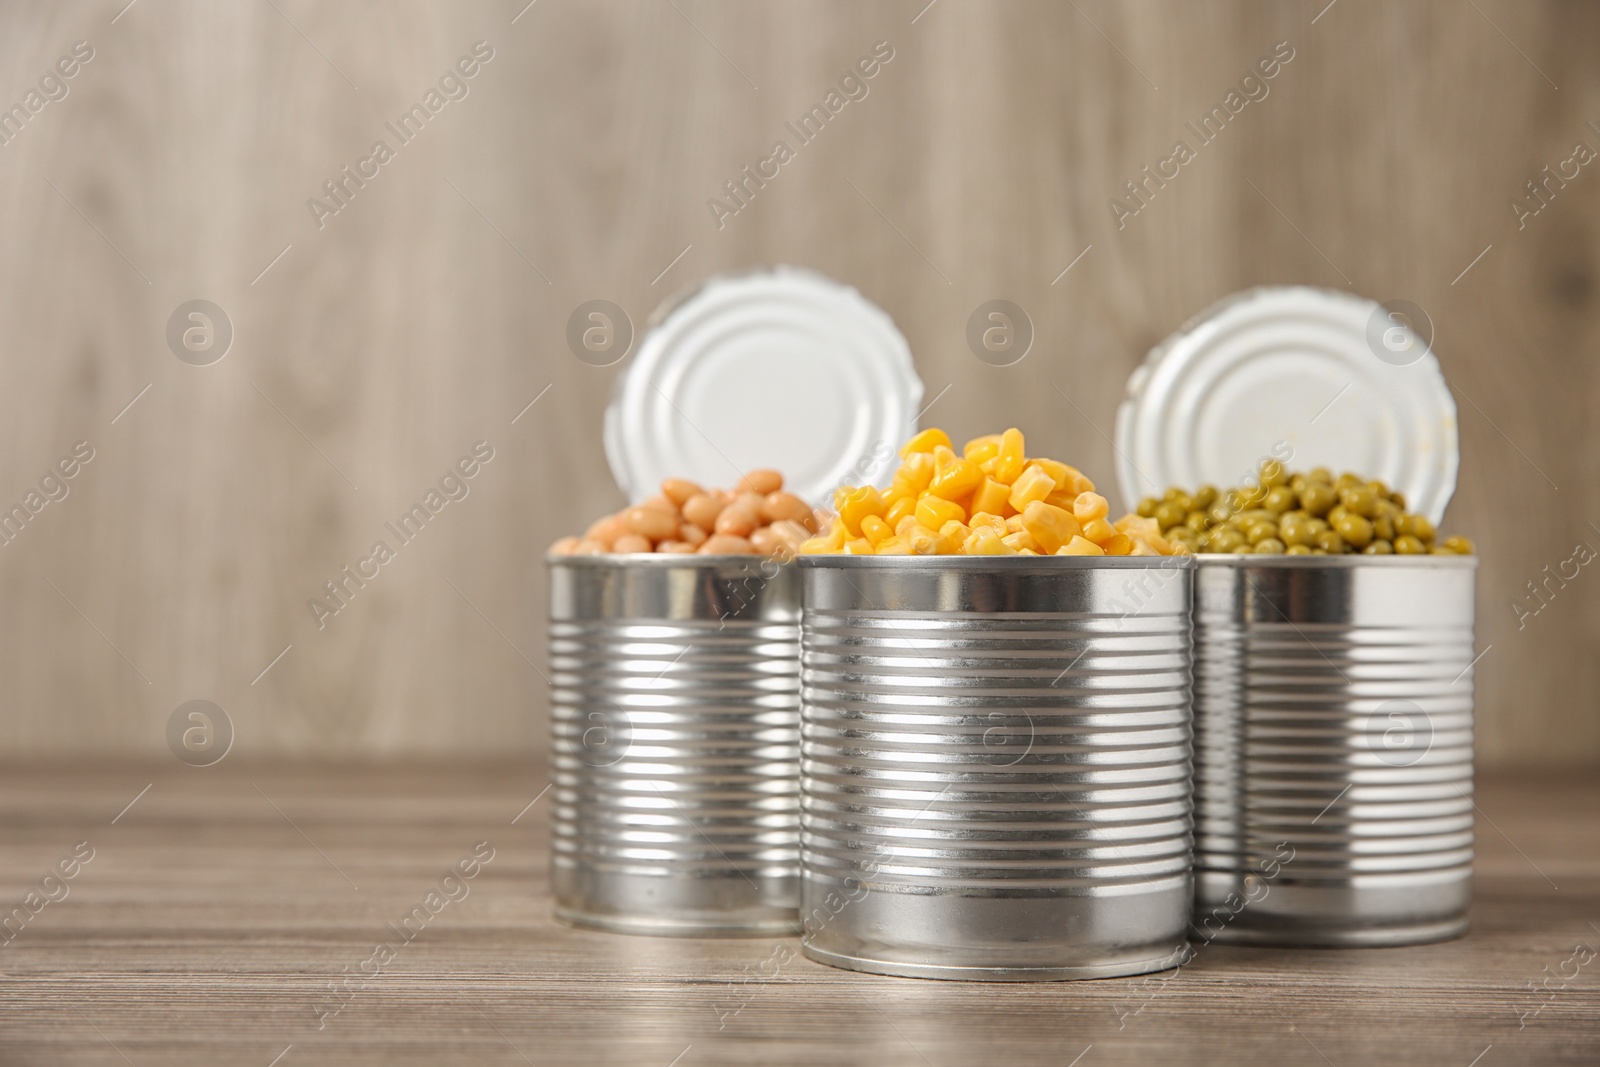 Photo of Open tin cans with conserved vegetables on wooden table. Space for text